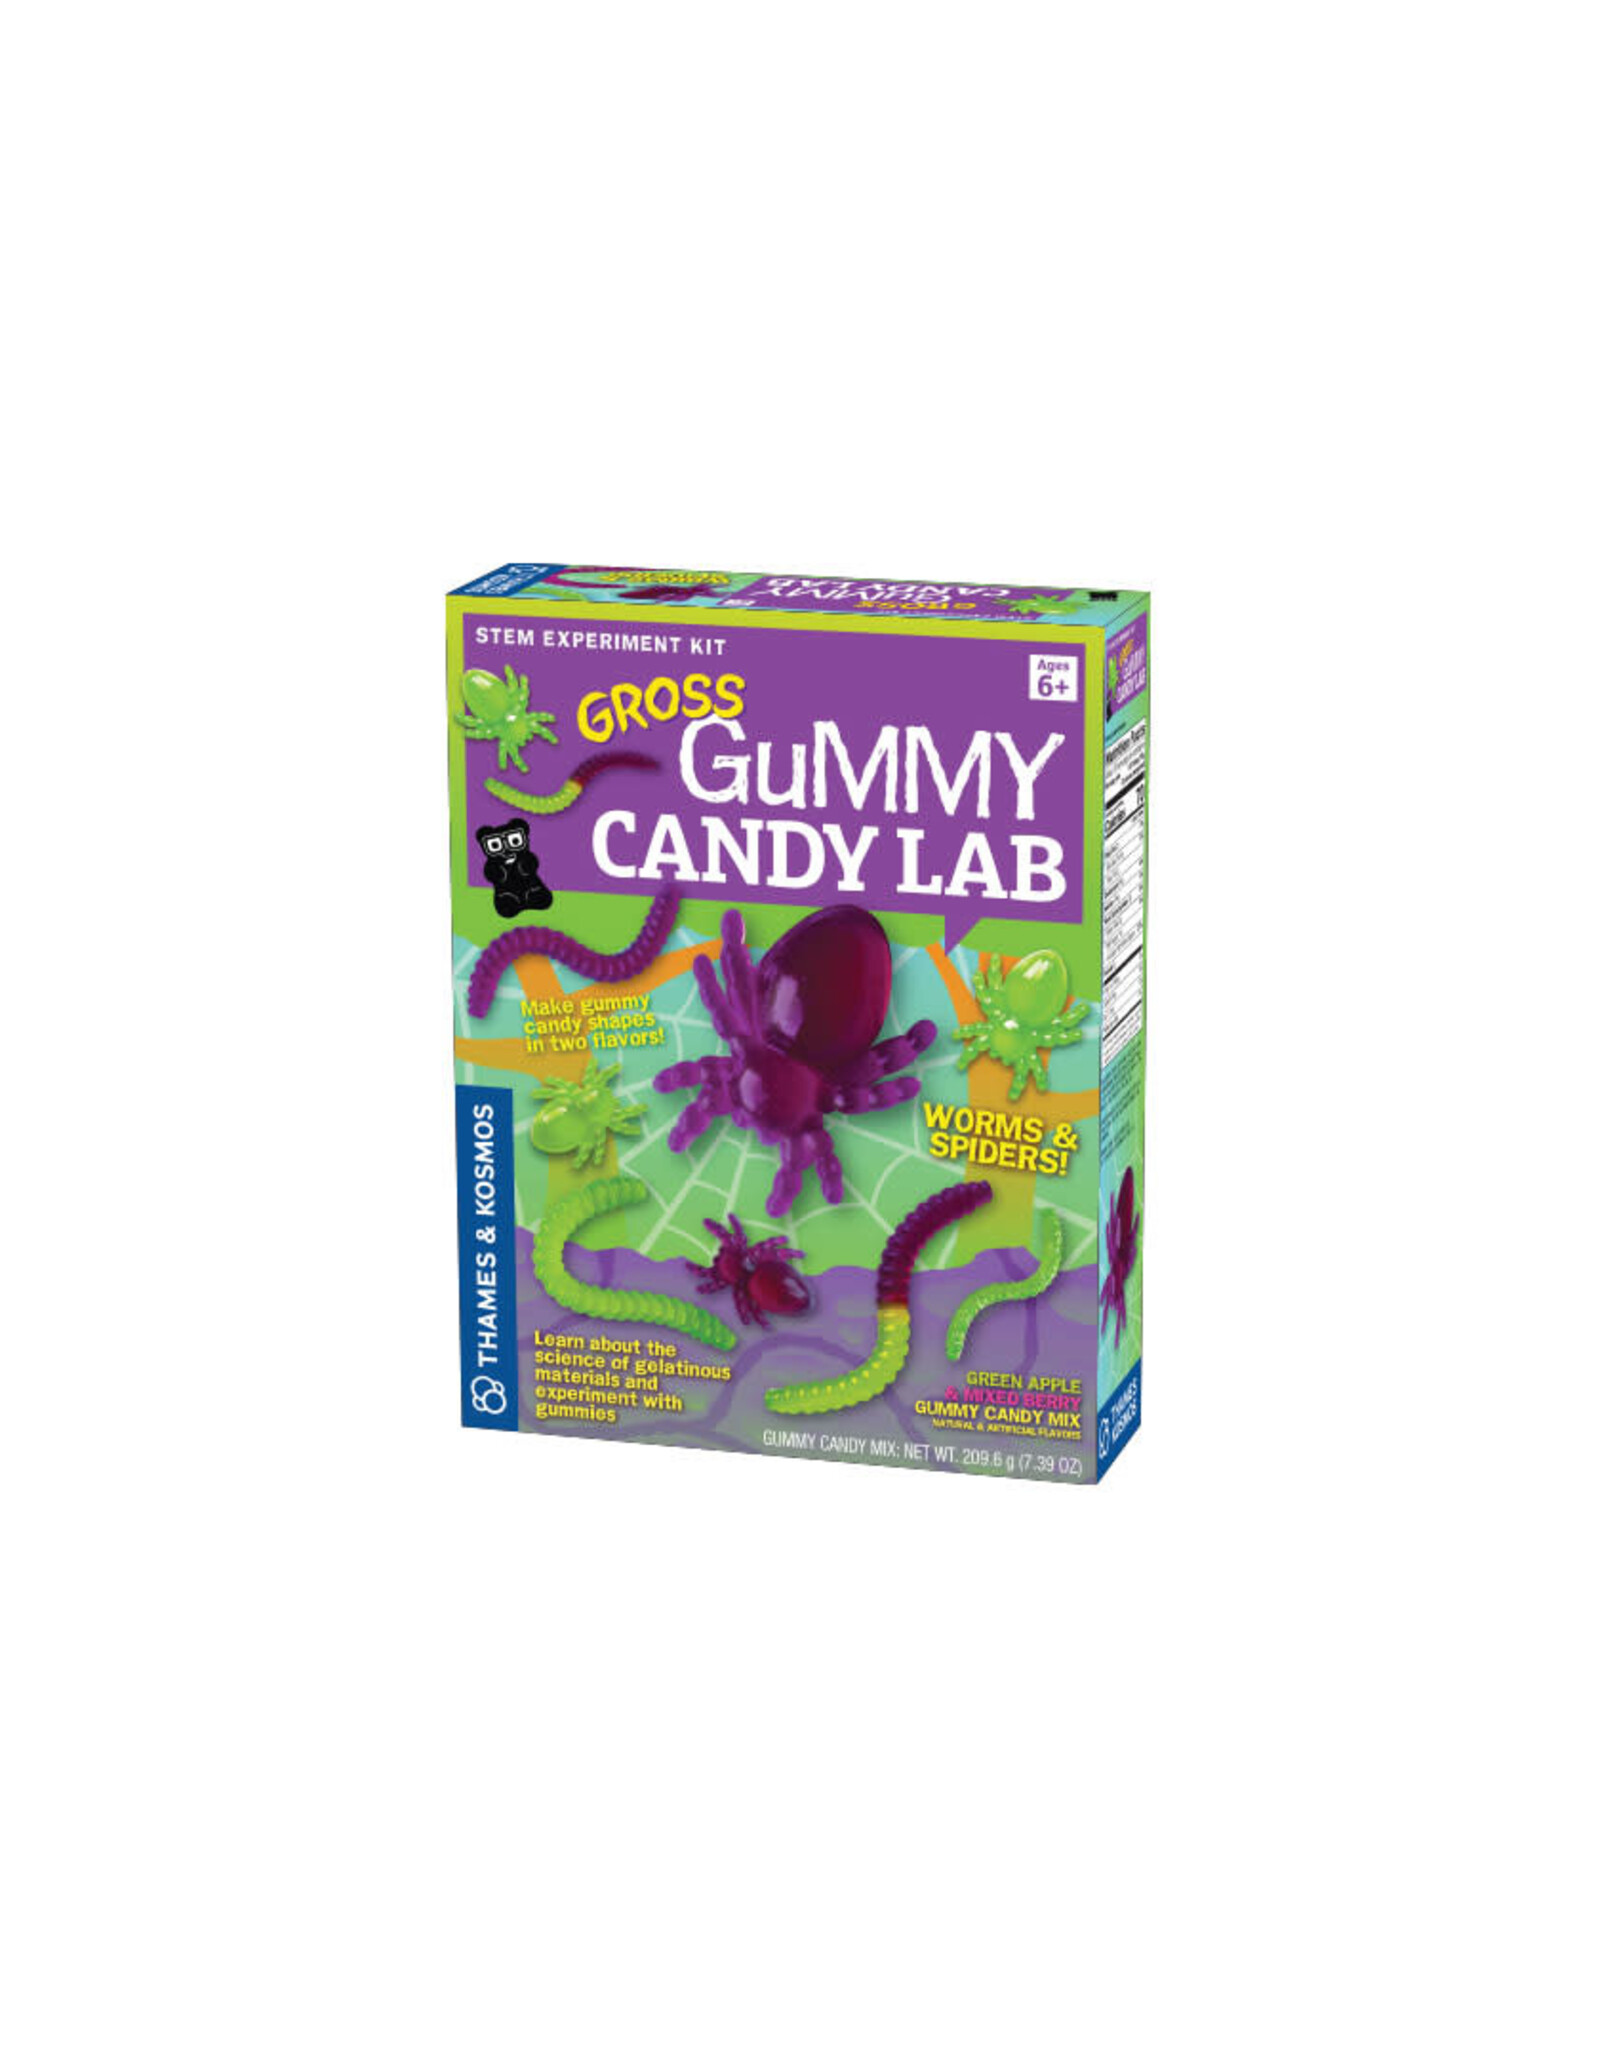 Geek & Co - Sci Gross Gummy Candy Lab: Worms and Spiders